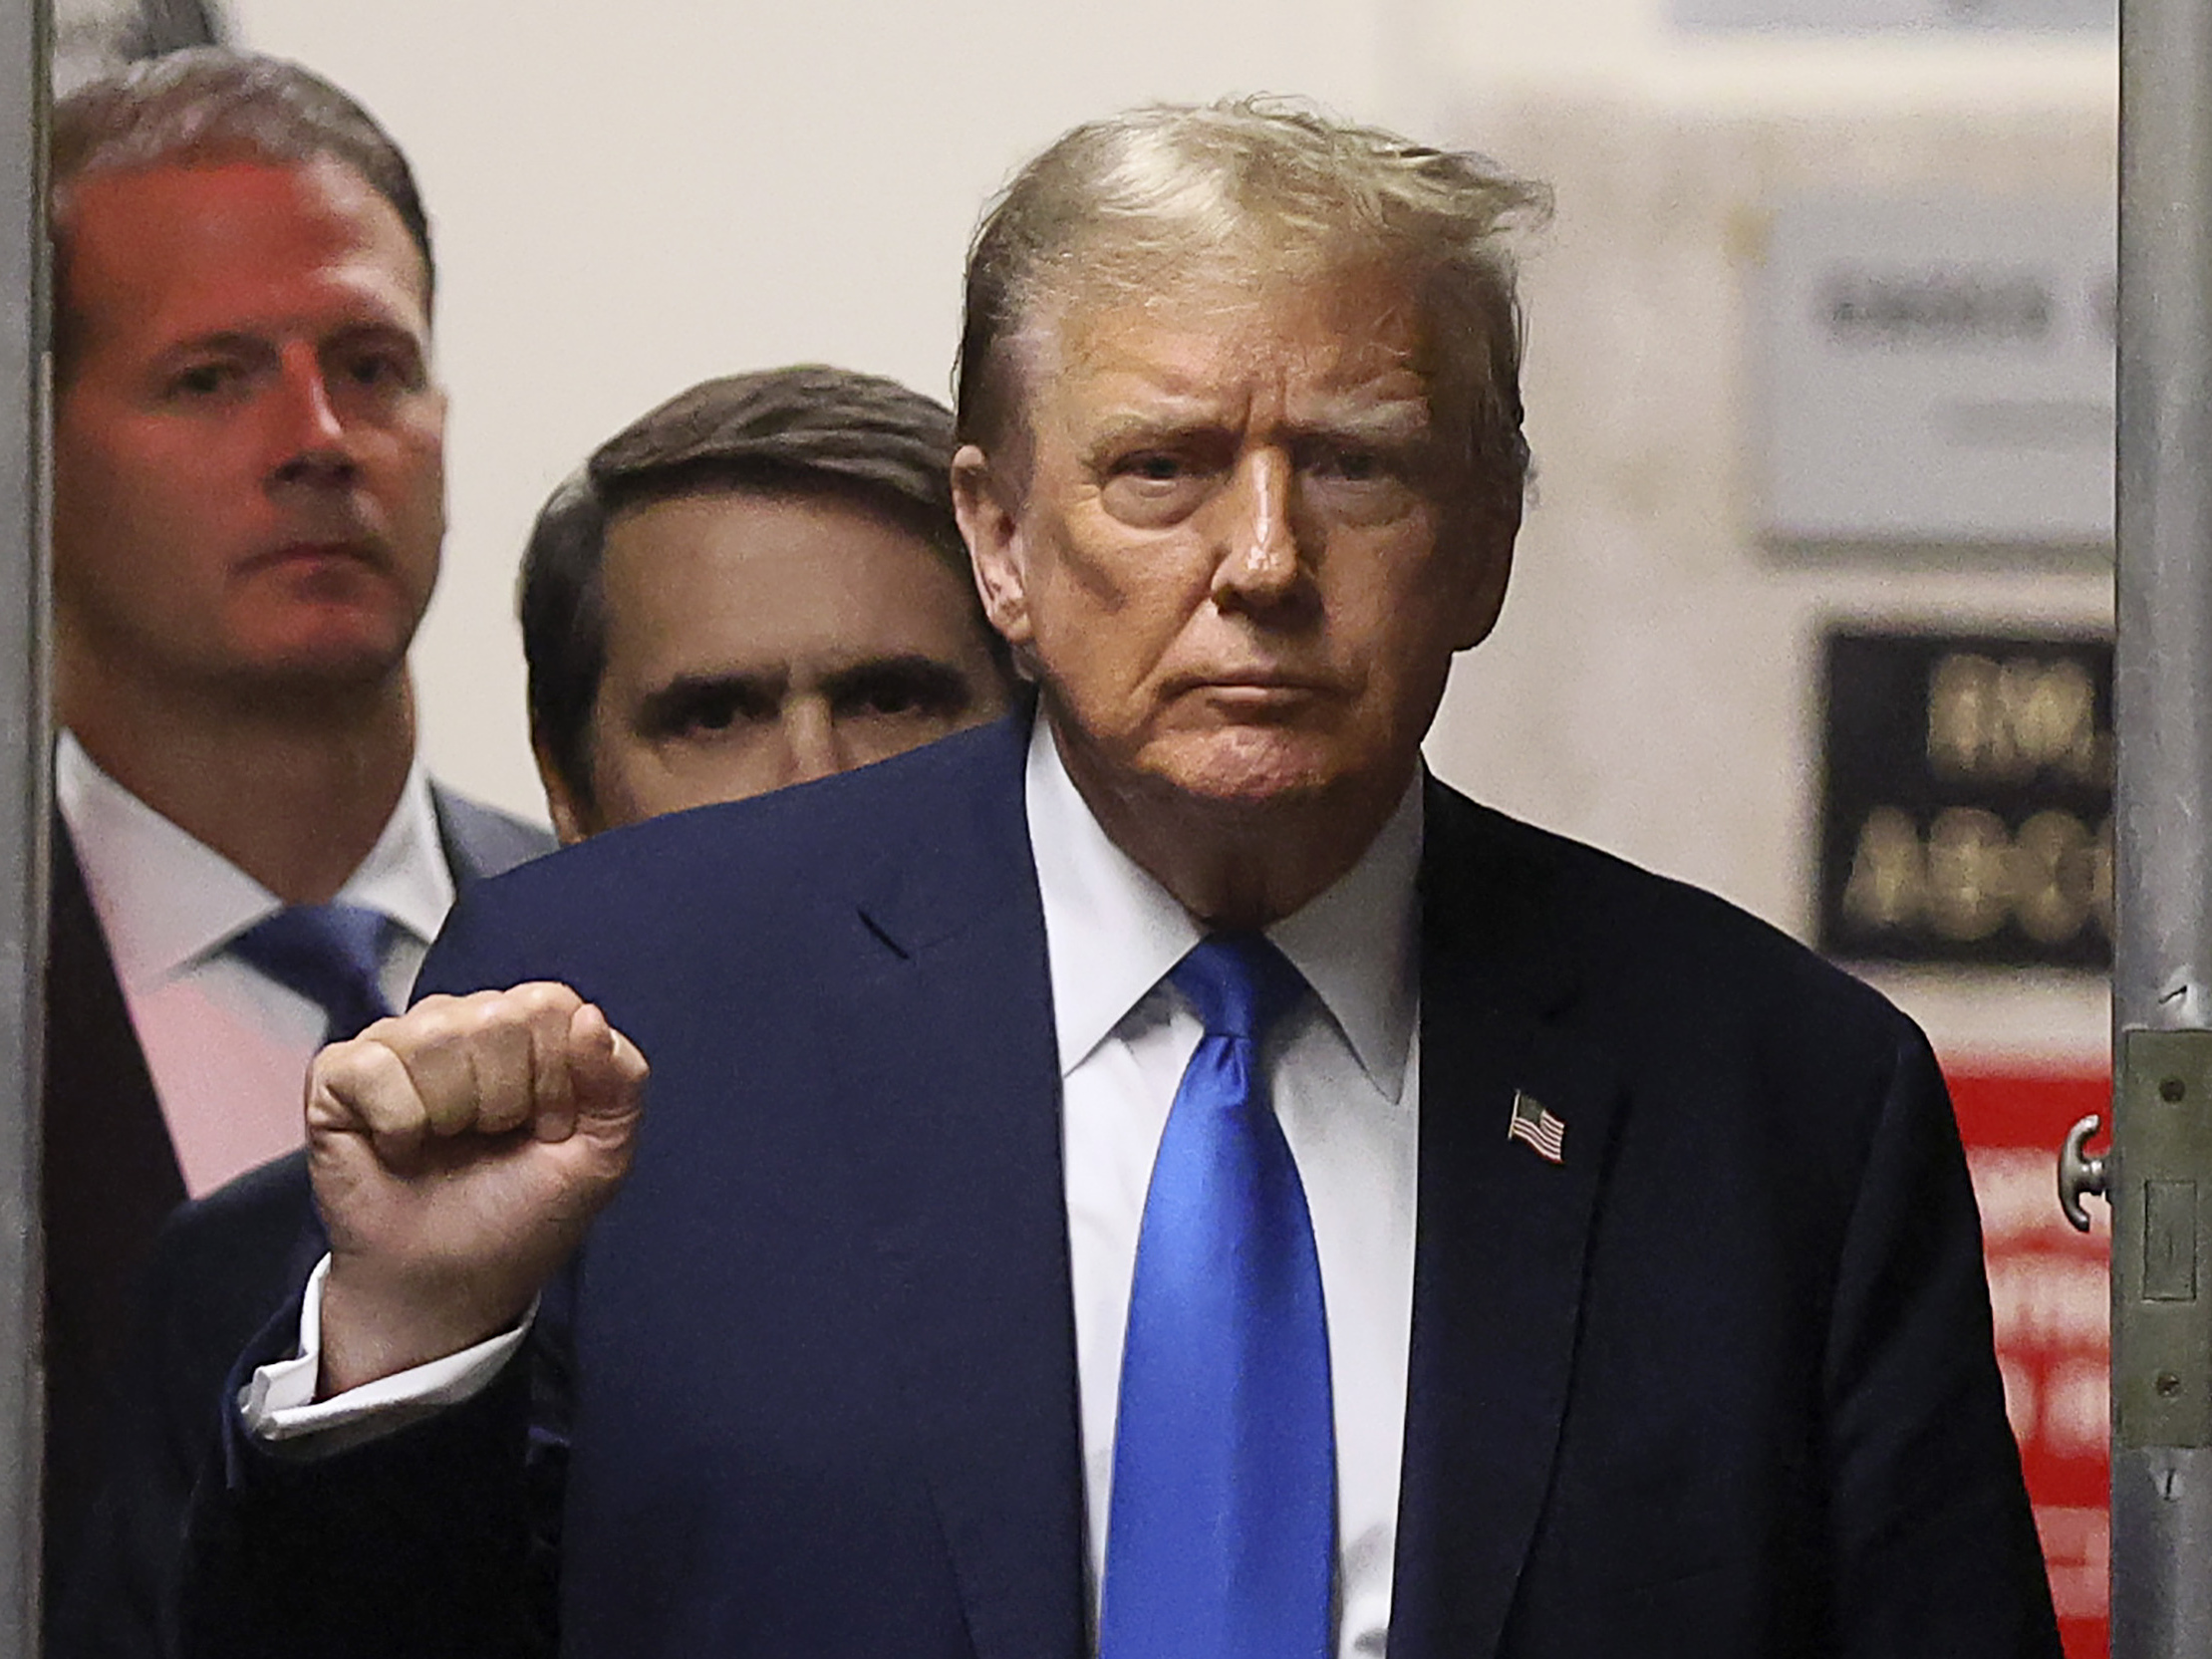 Former President Donald Trump gestures as he returns to the courtroom during a recess in his criminal trial at Manhattan Criminal Court on Thursday.